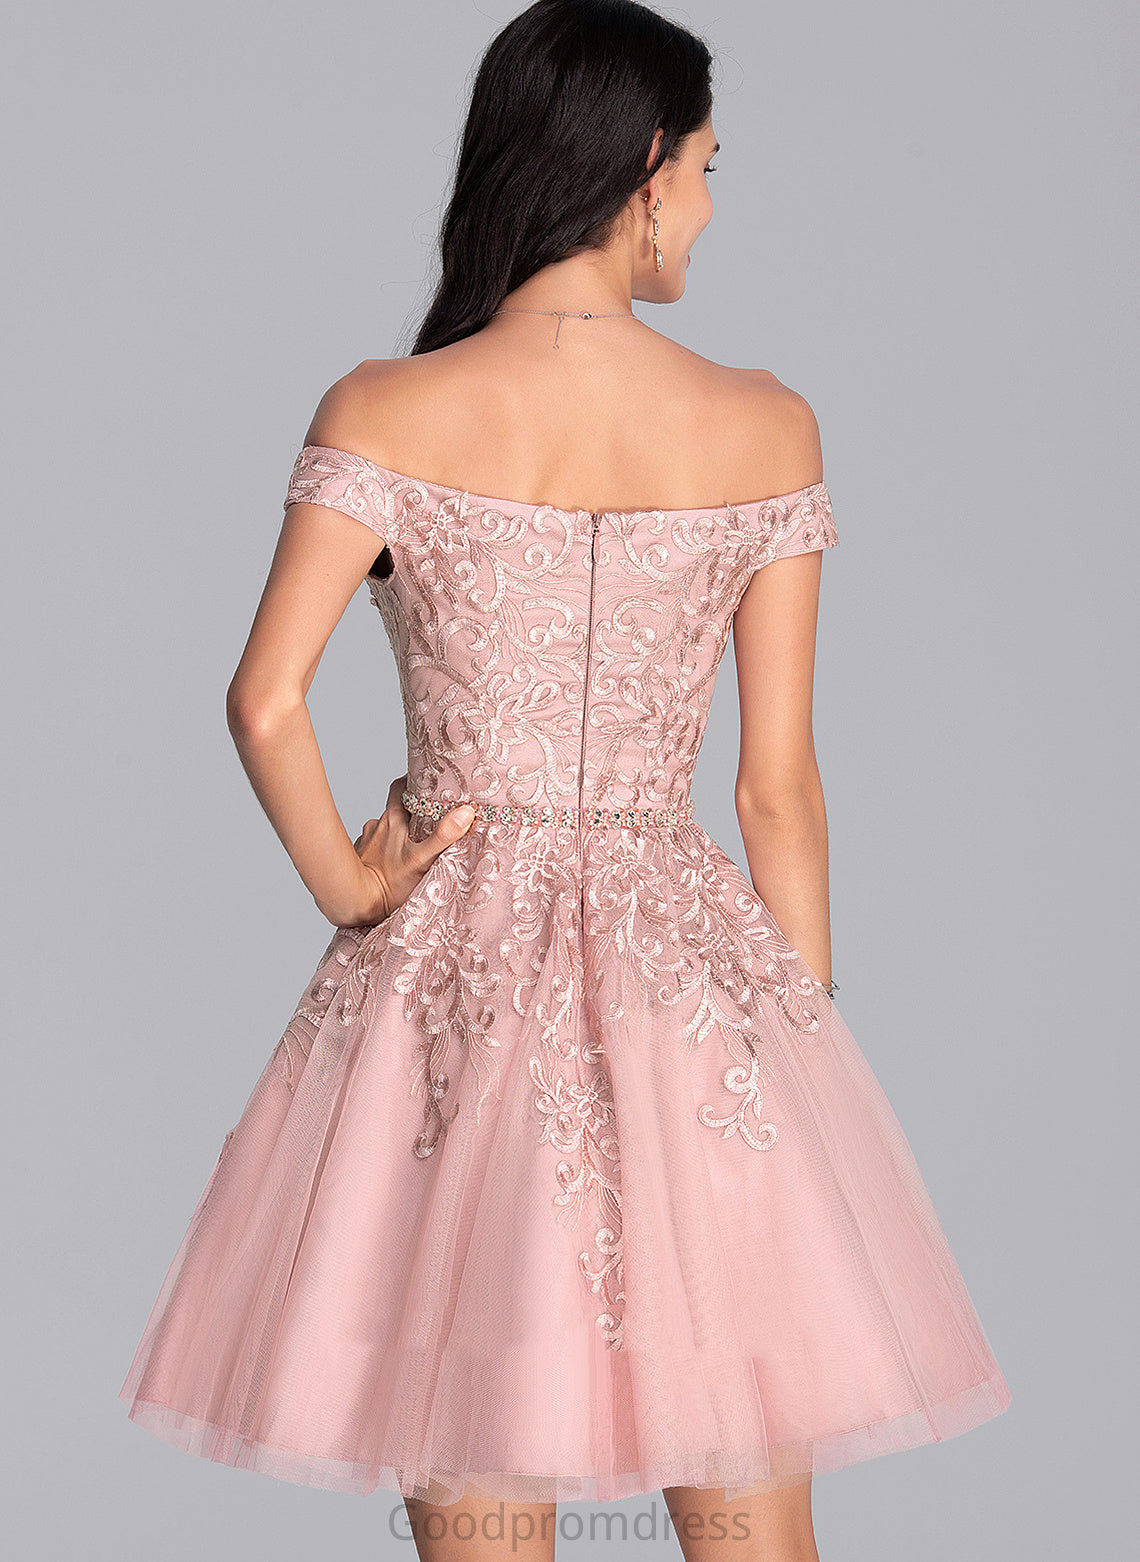 Beading Homecoming Dresses Lace Homecoming With A-Line Off-the-Shoulder Alondra Short/Mini Dress Tulle